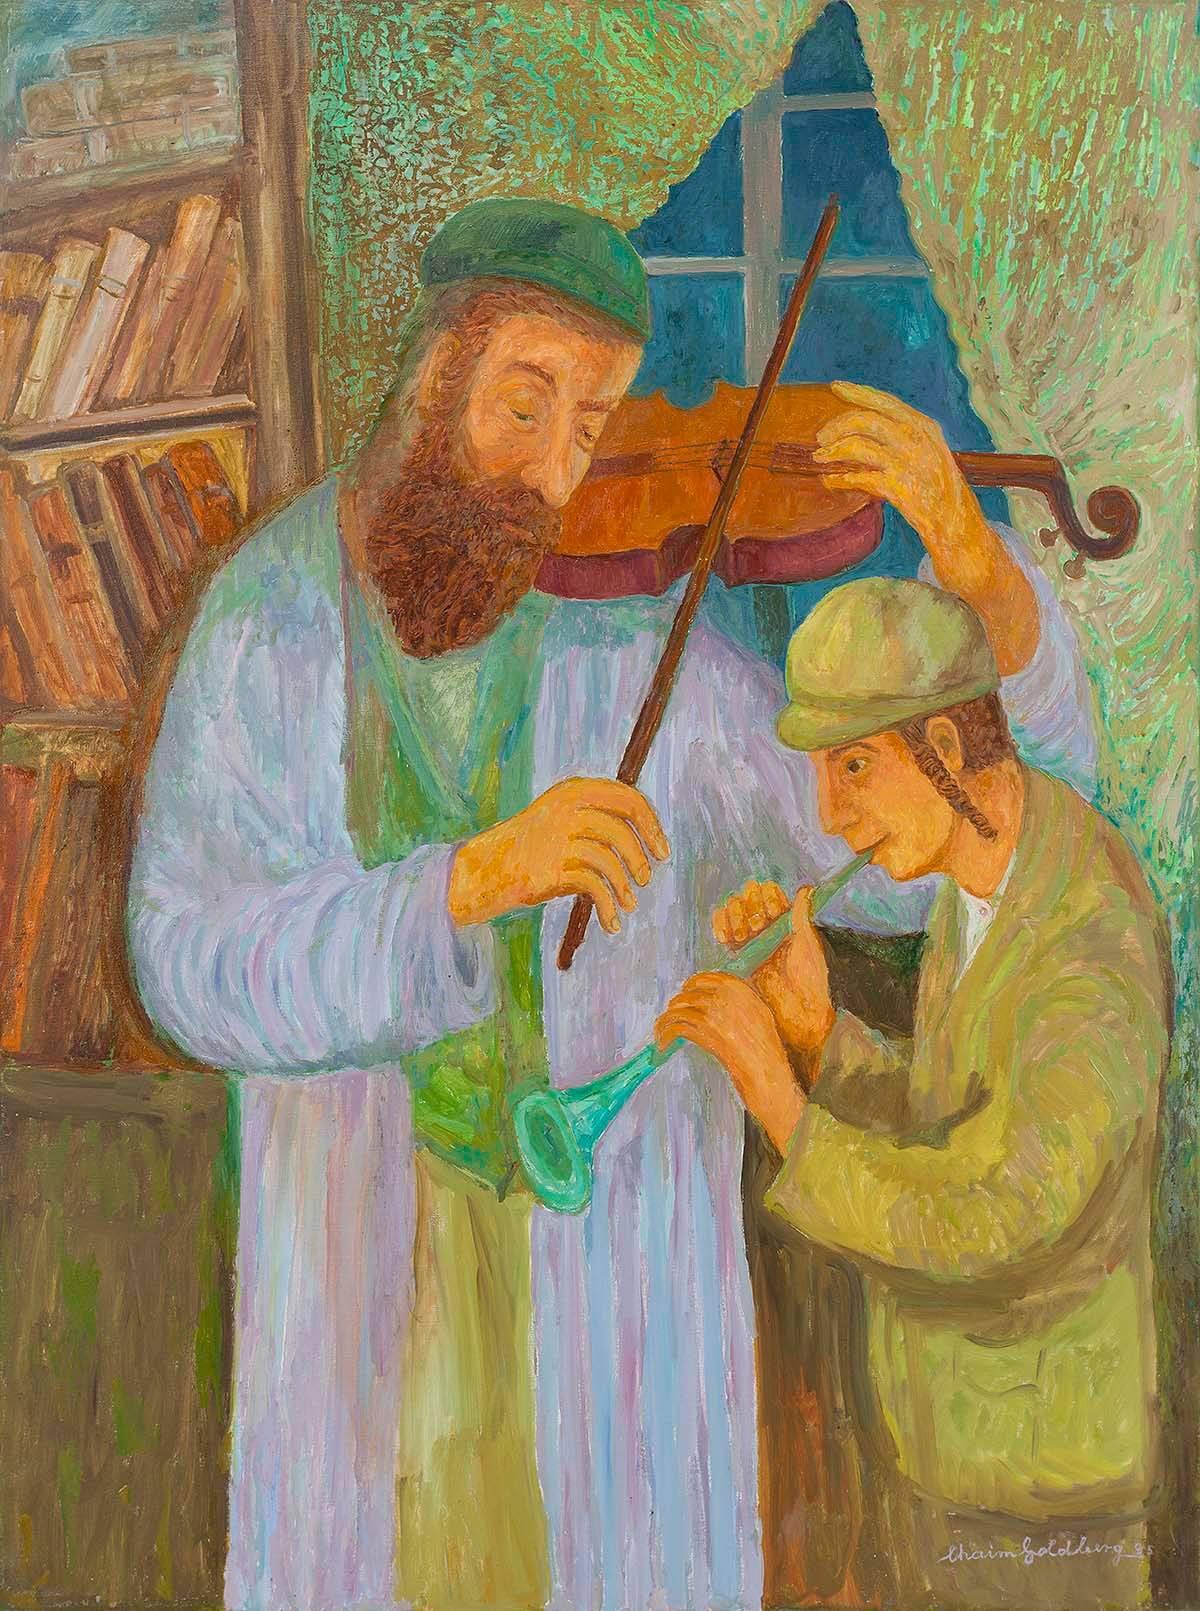 Genre: Judaica
Subject: People
Medium: Oil
Surface: Canvas
Country: United States
Dimensions: 40